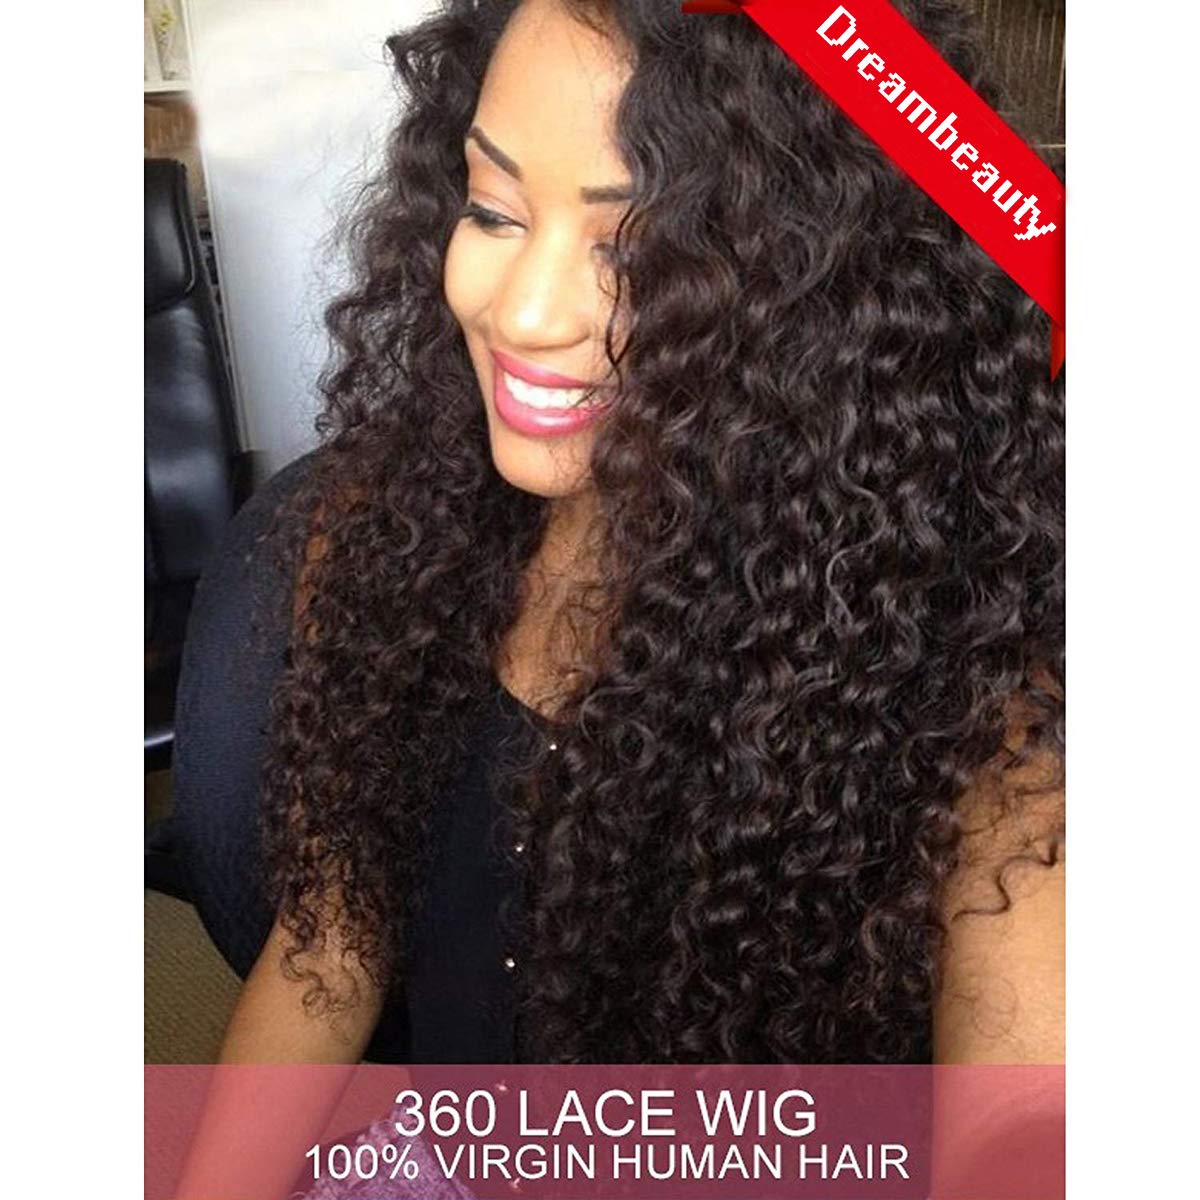 Dreambeauty 360 Lace Front Wig 180% Density Deep Wave Brazilian Virgin Hair 360 Lace Front Human Hair Wigs Pre Plucked Bleached Knots 360 Full Lace Human Hair Wigs for Black Women (16 inch)